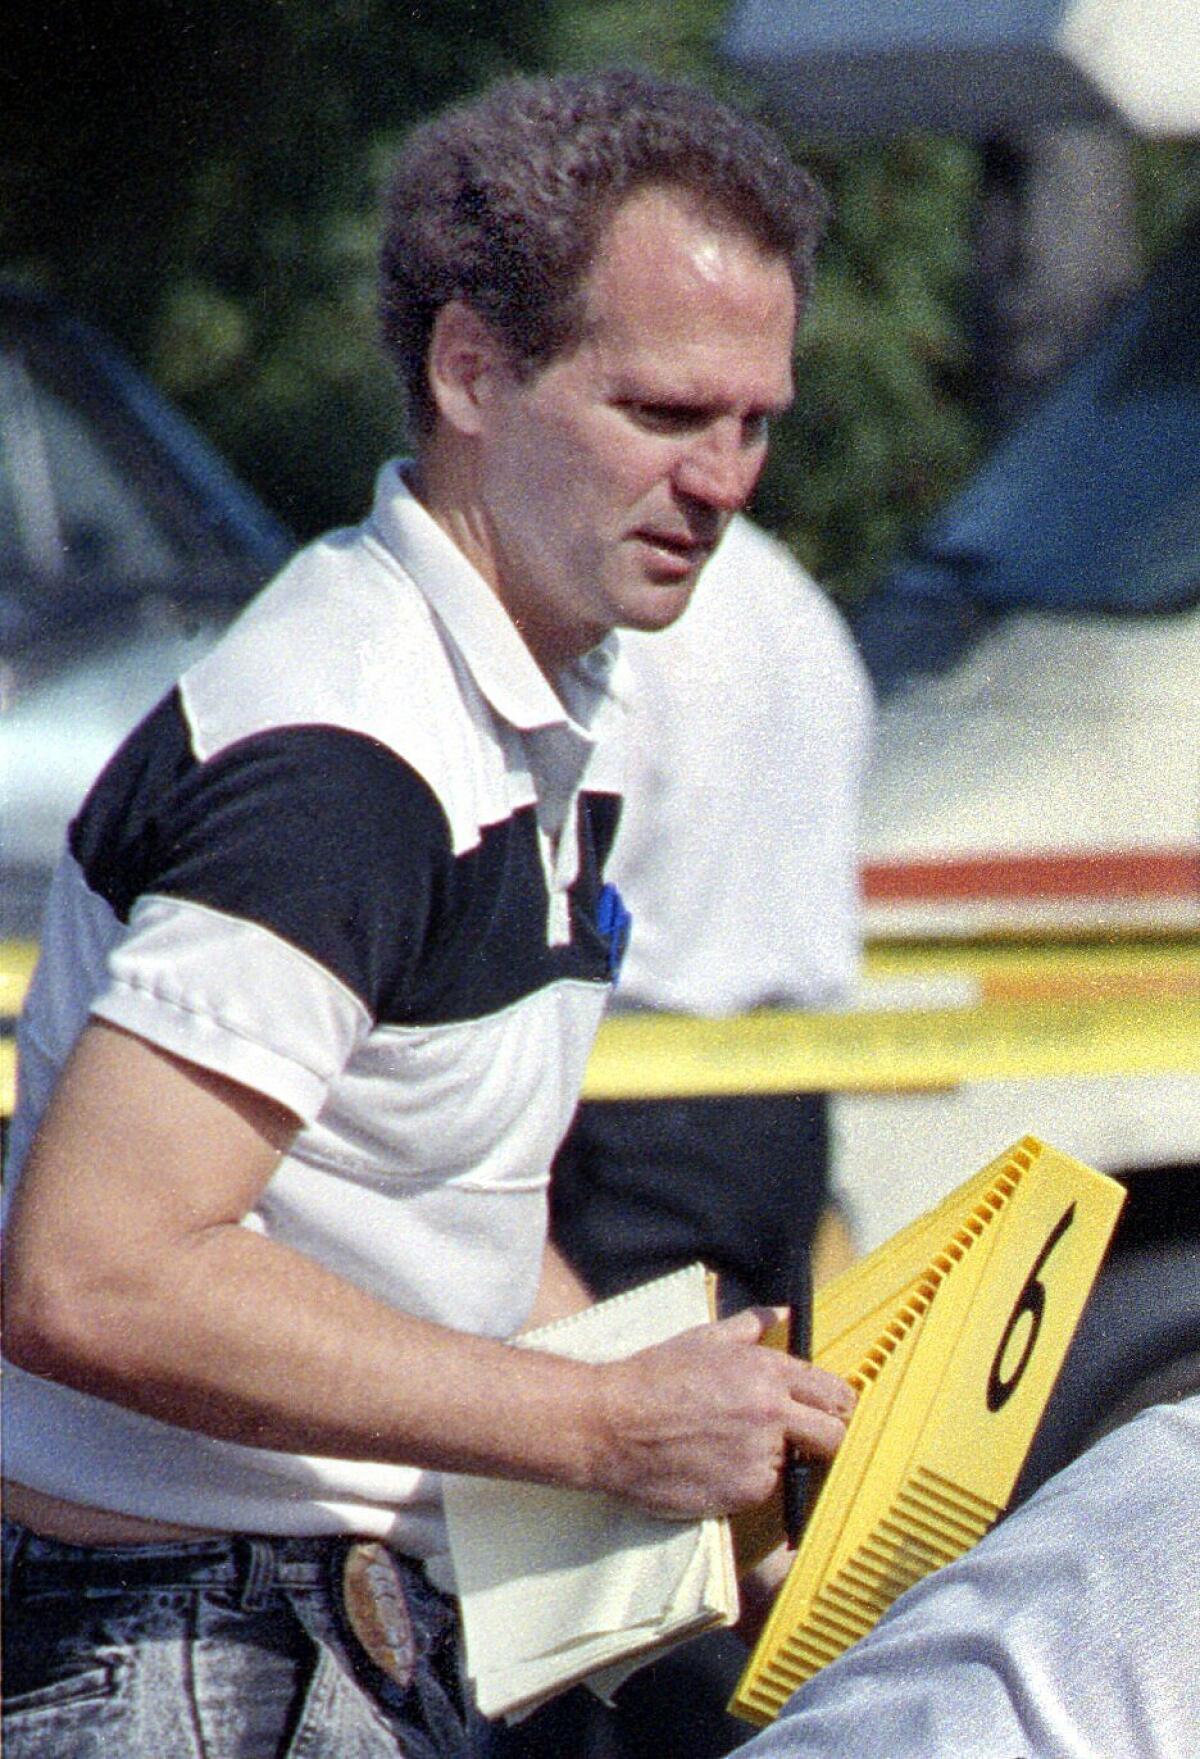 SDPD criminalist Kevin Brown works at a crime scene in 1991. Brown, who worked for 20 years in the San Diego Police Department's laboratory, apparently committed suicide as police were making preparations to arrest him in the 1984 murder of 14-year-old Claire Hough. — Howard Lipin / U-T San Diego